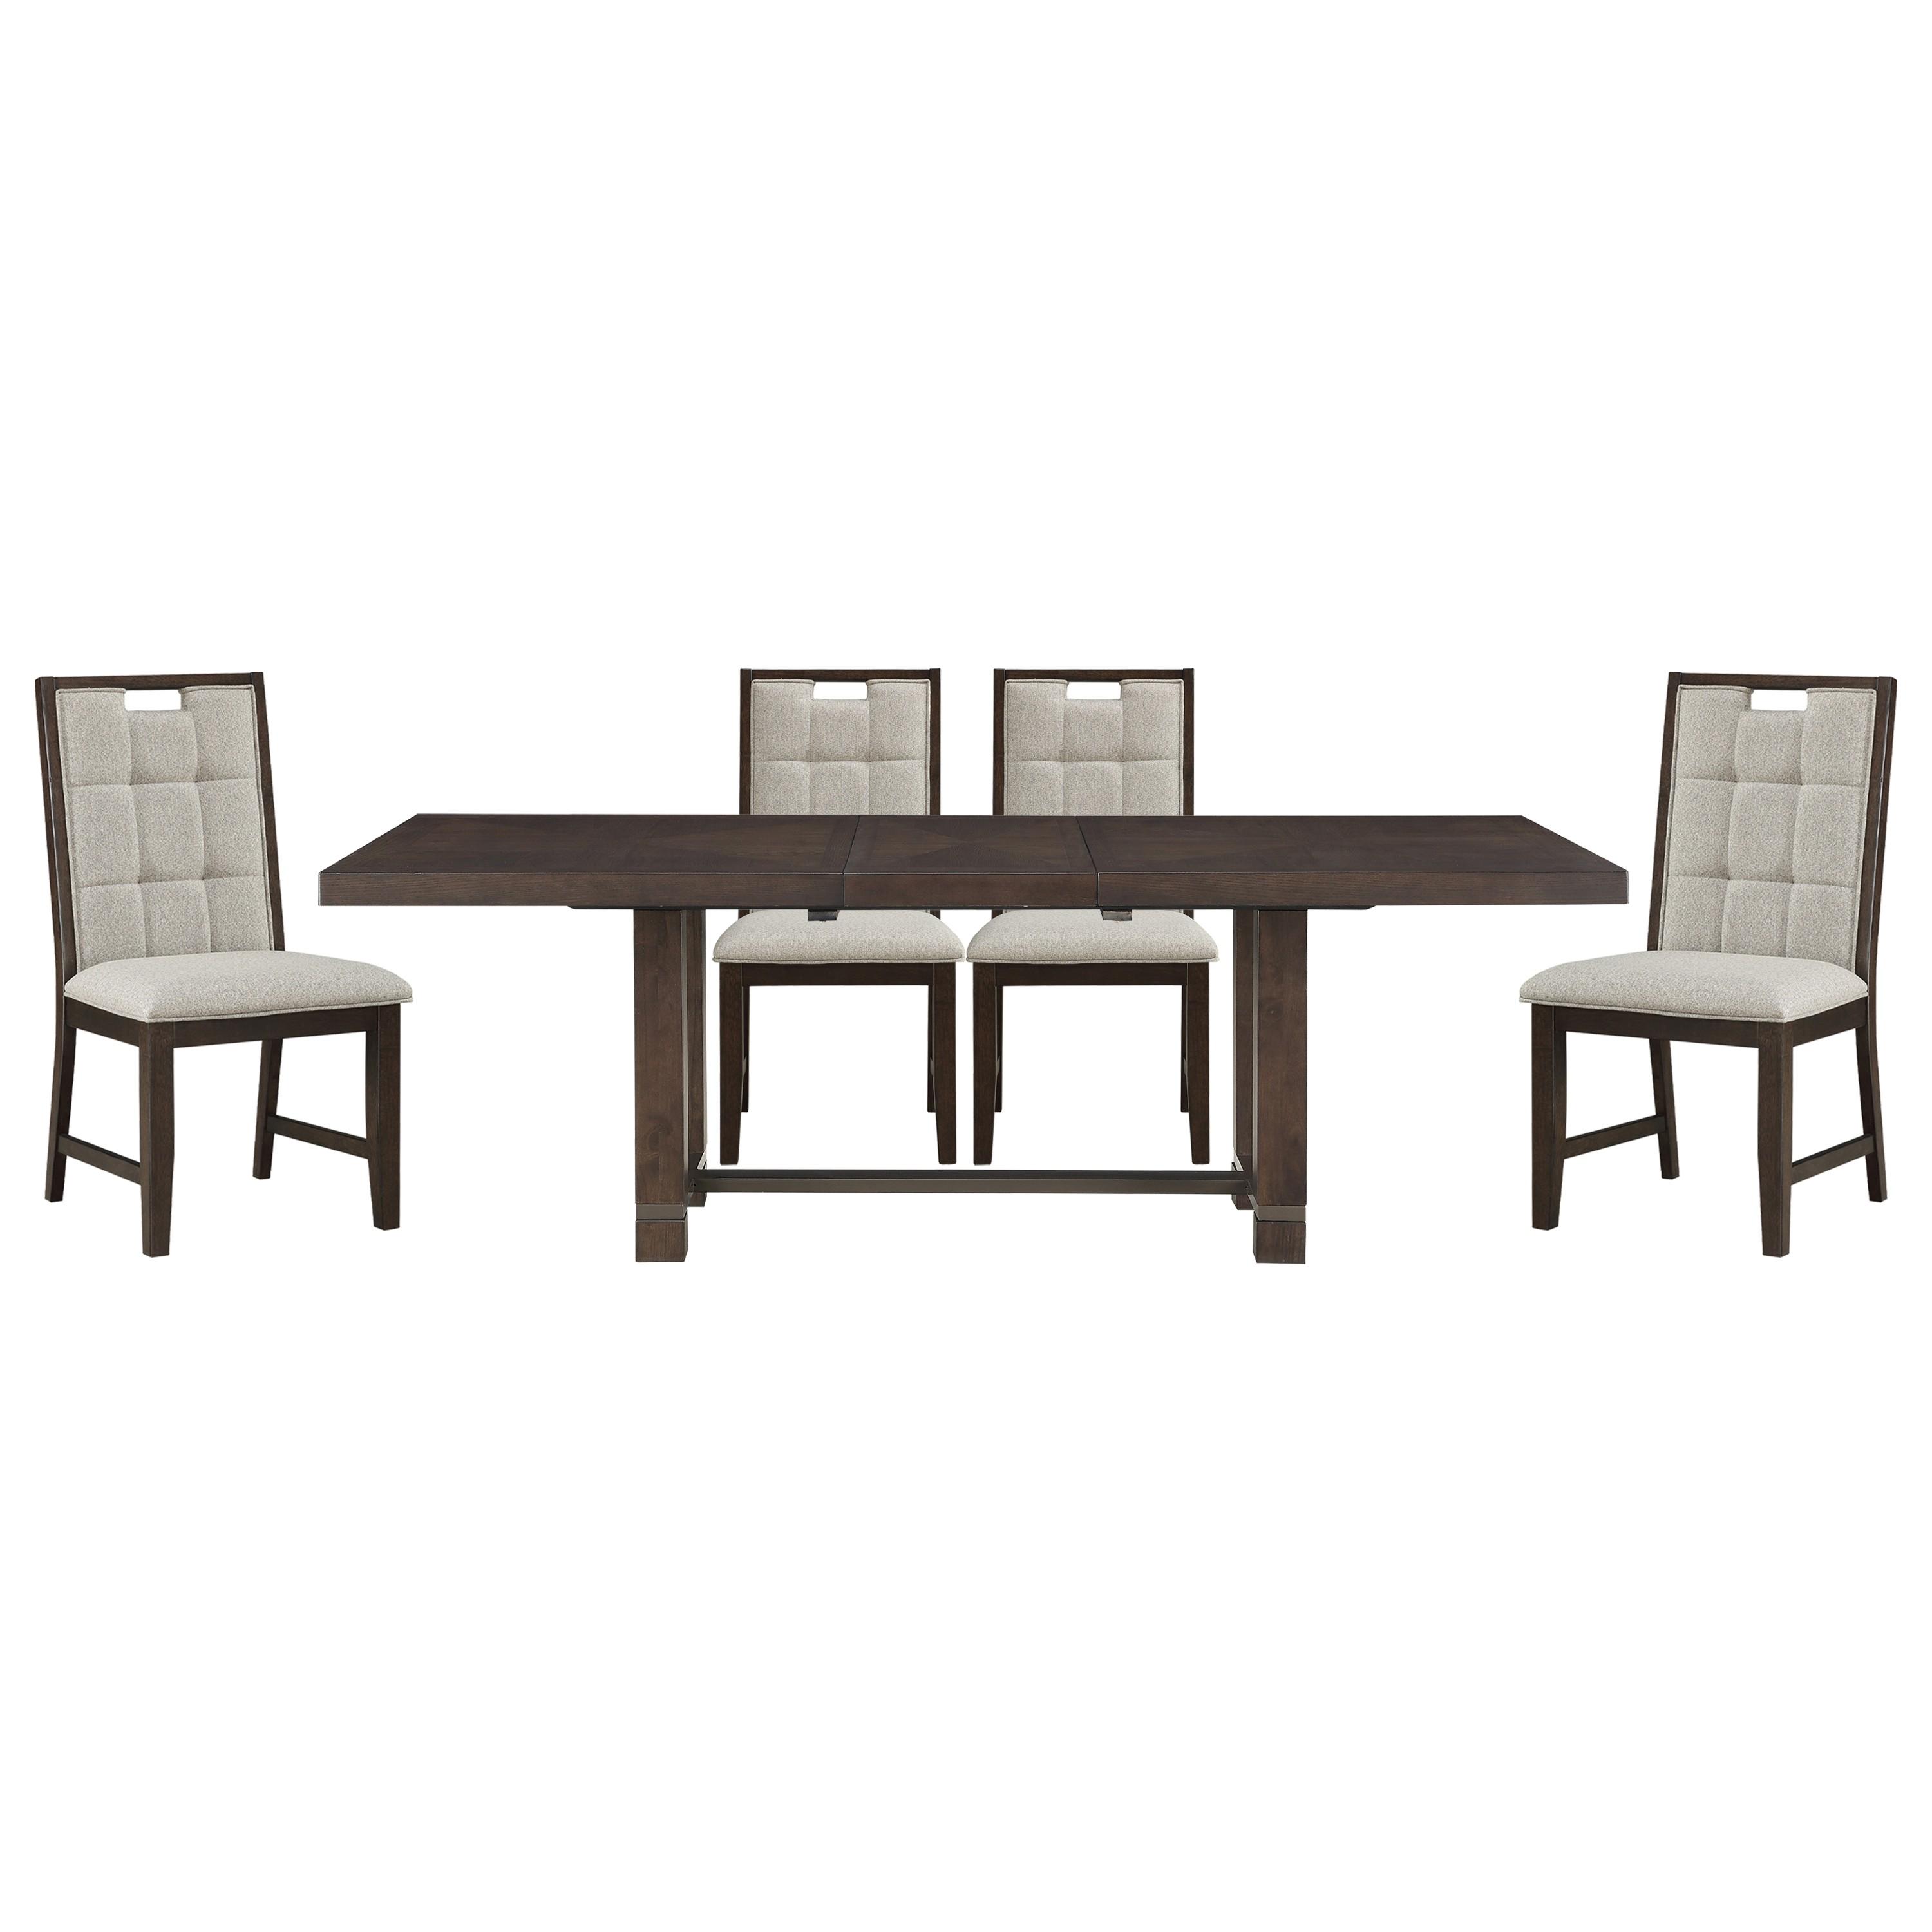 Transitional Dining Room Set 5654-92*5PC Rathdrum 5654-92*5PC in Dark Oak Polyester